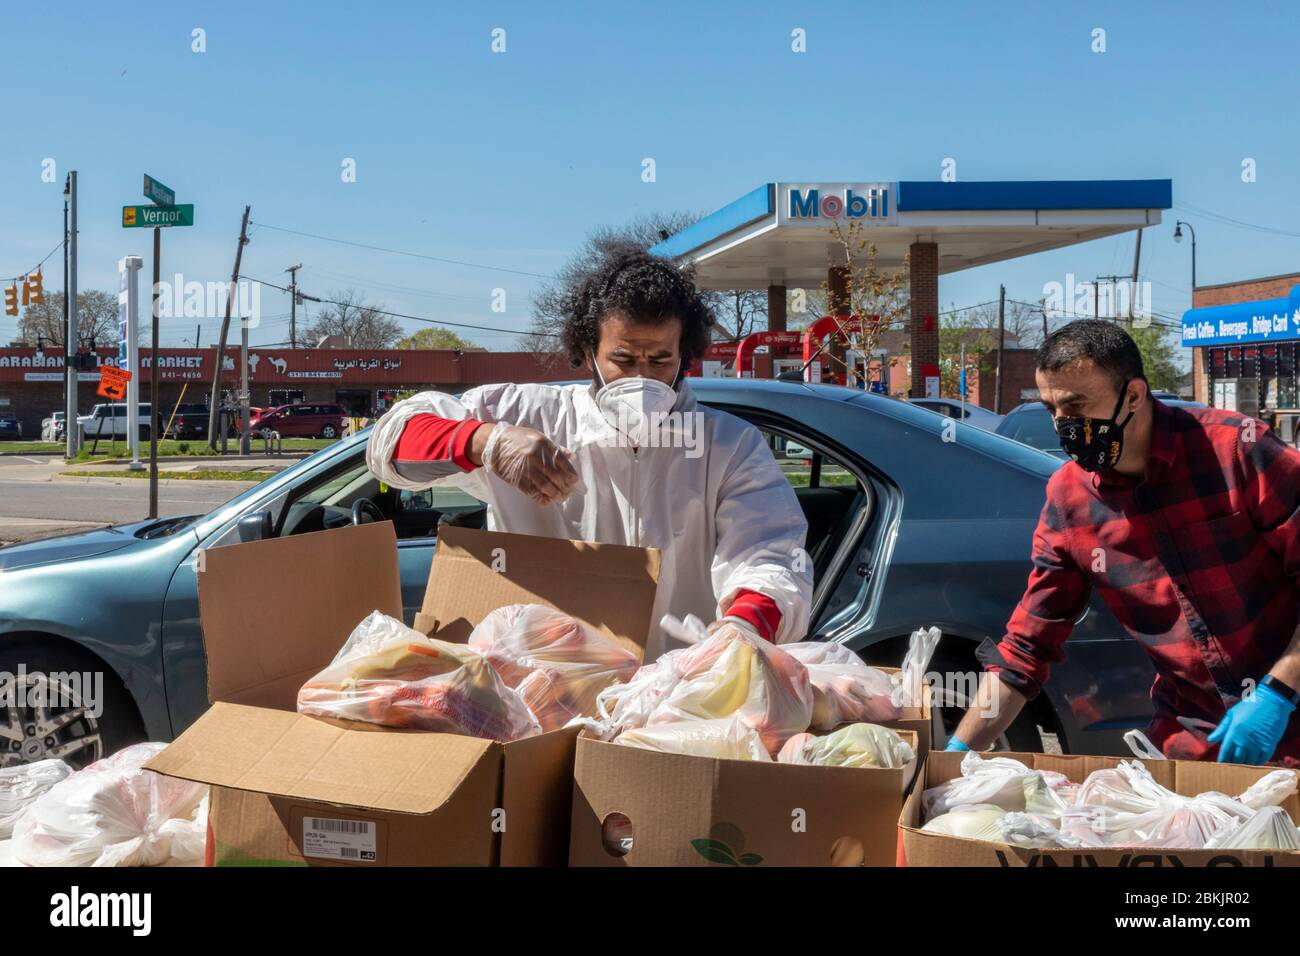 Dearborn, Michigan - During the coronavirus pandemic, a long line of cars waited for food for children distributed at the American Moslem Society mosq Stock Photo